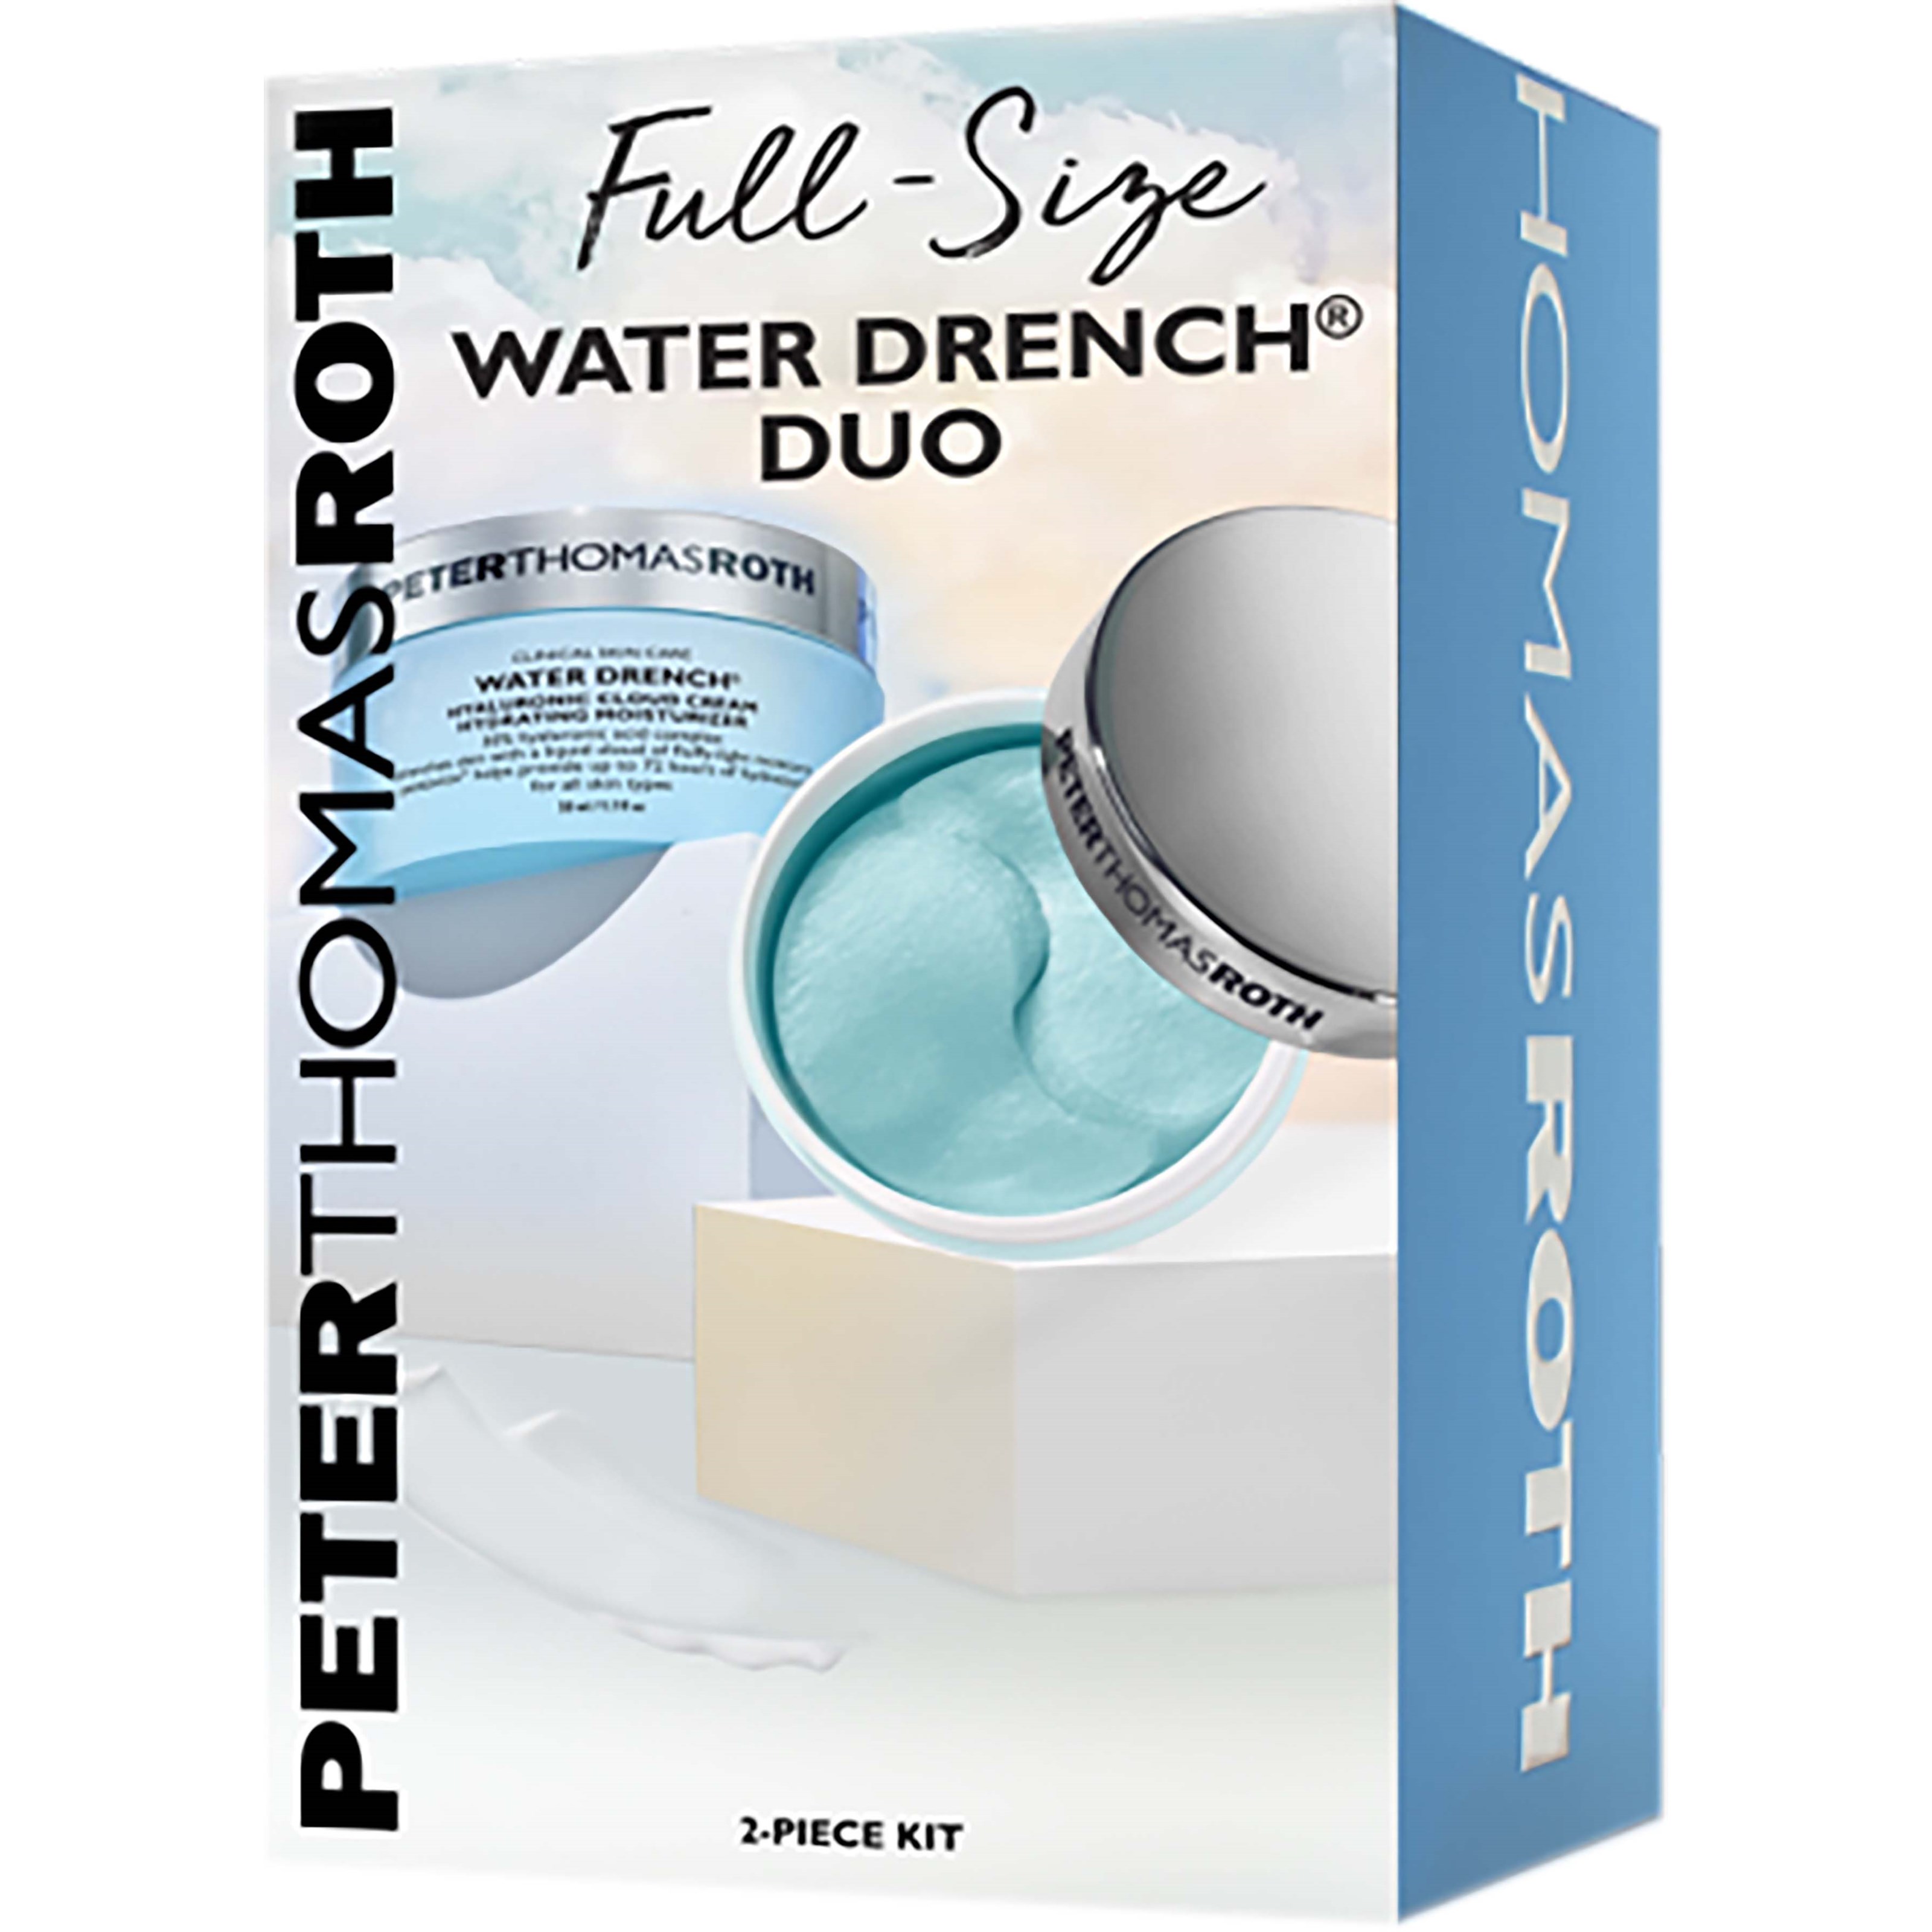 Peter Thomas Roth Water Drench® Full-Size Duo